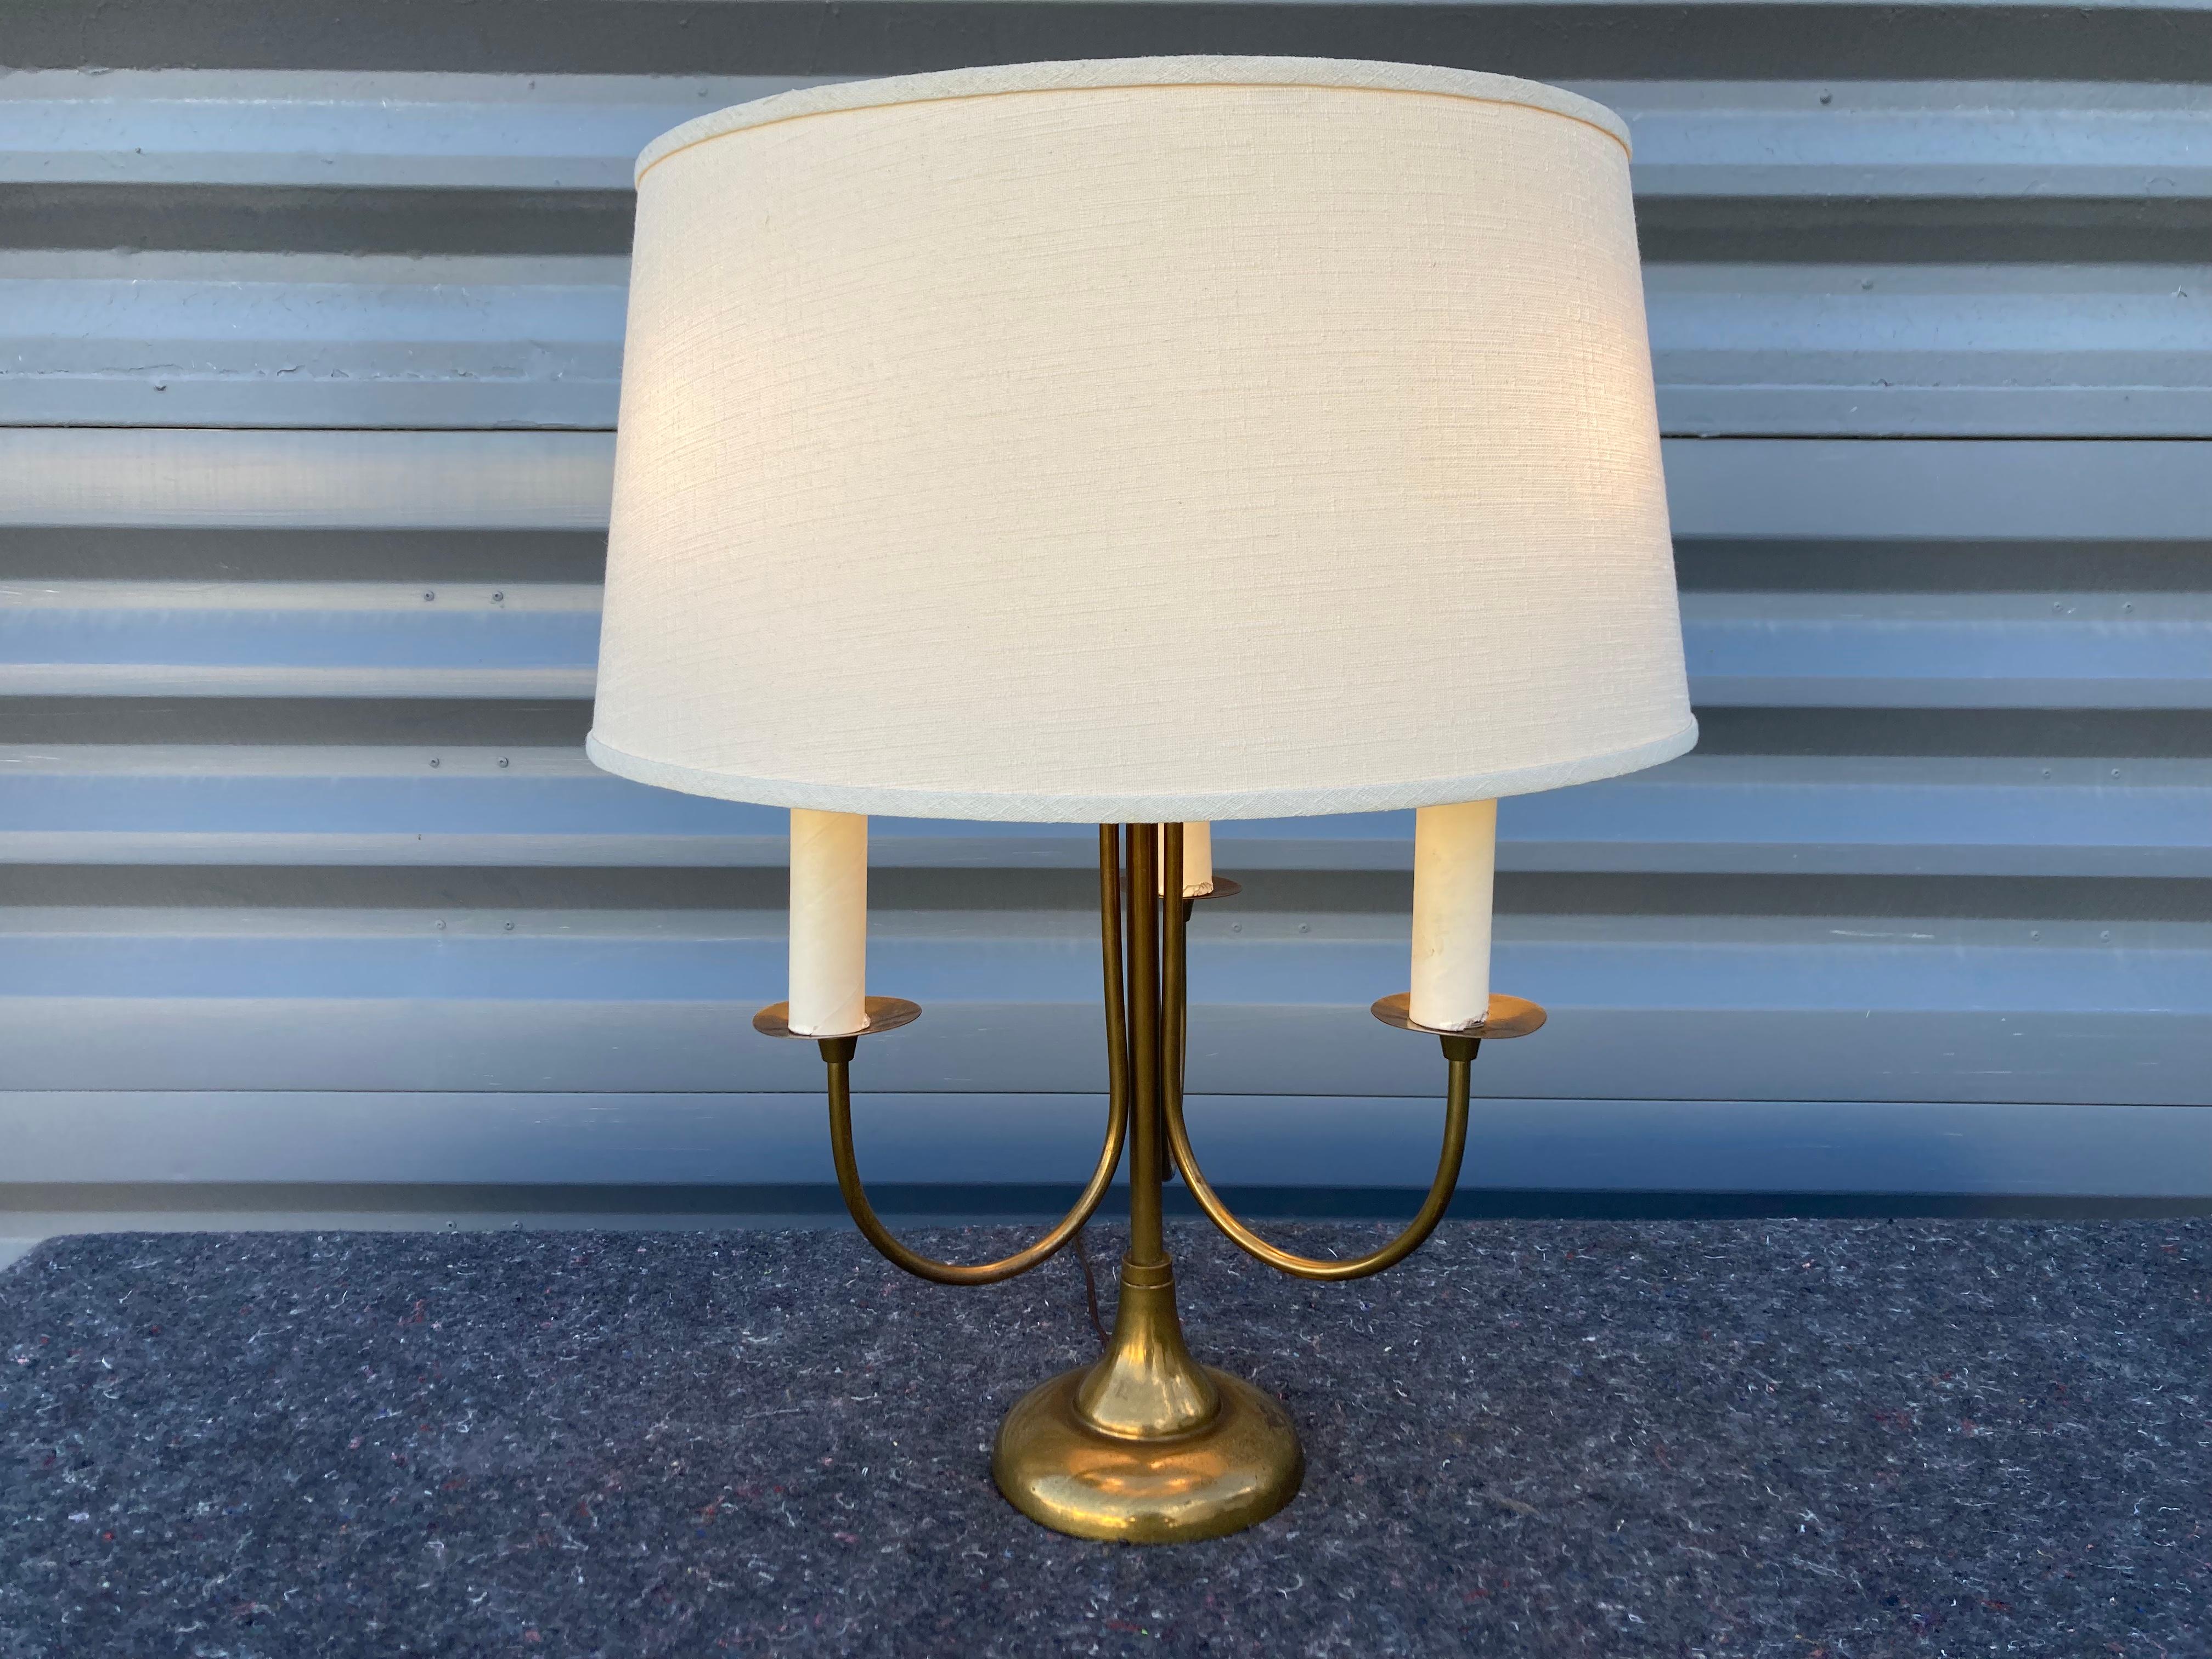 Pair of Mid-Century Modern Table Lamps, Brass, USA, 1950s For Sale 14